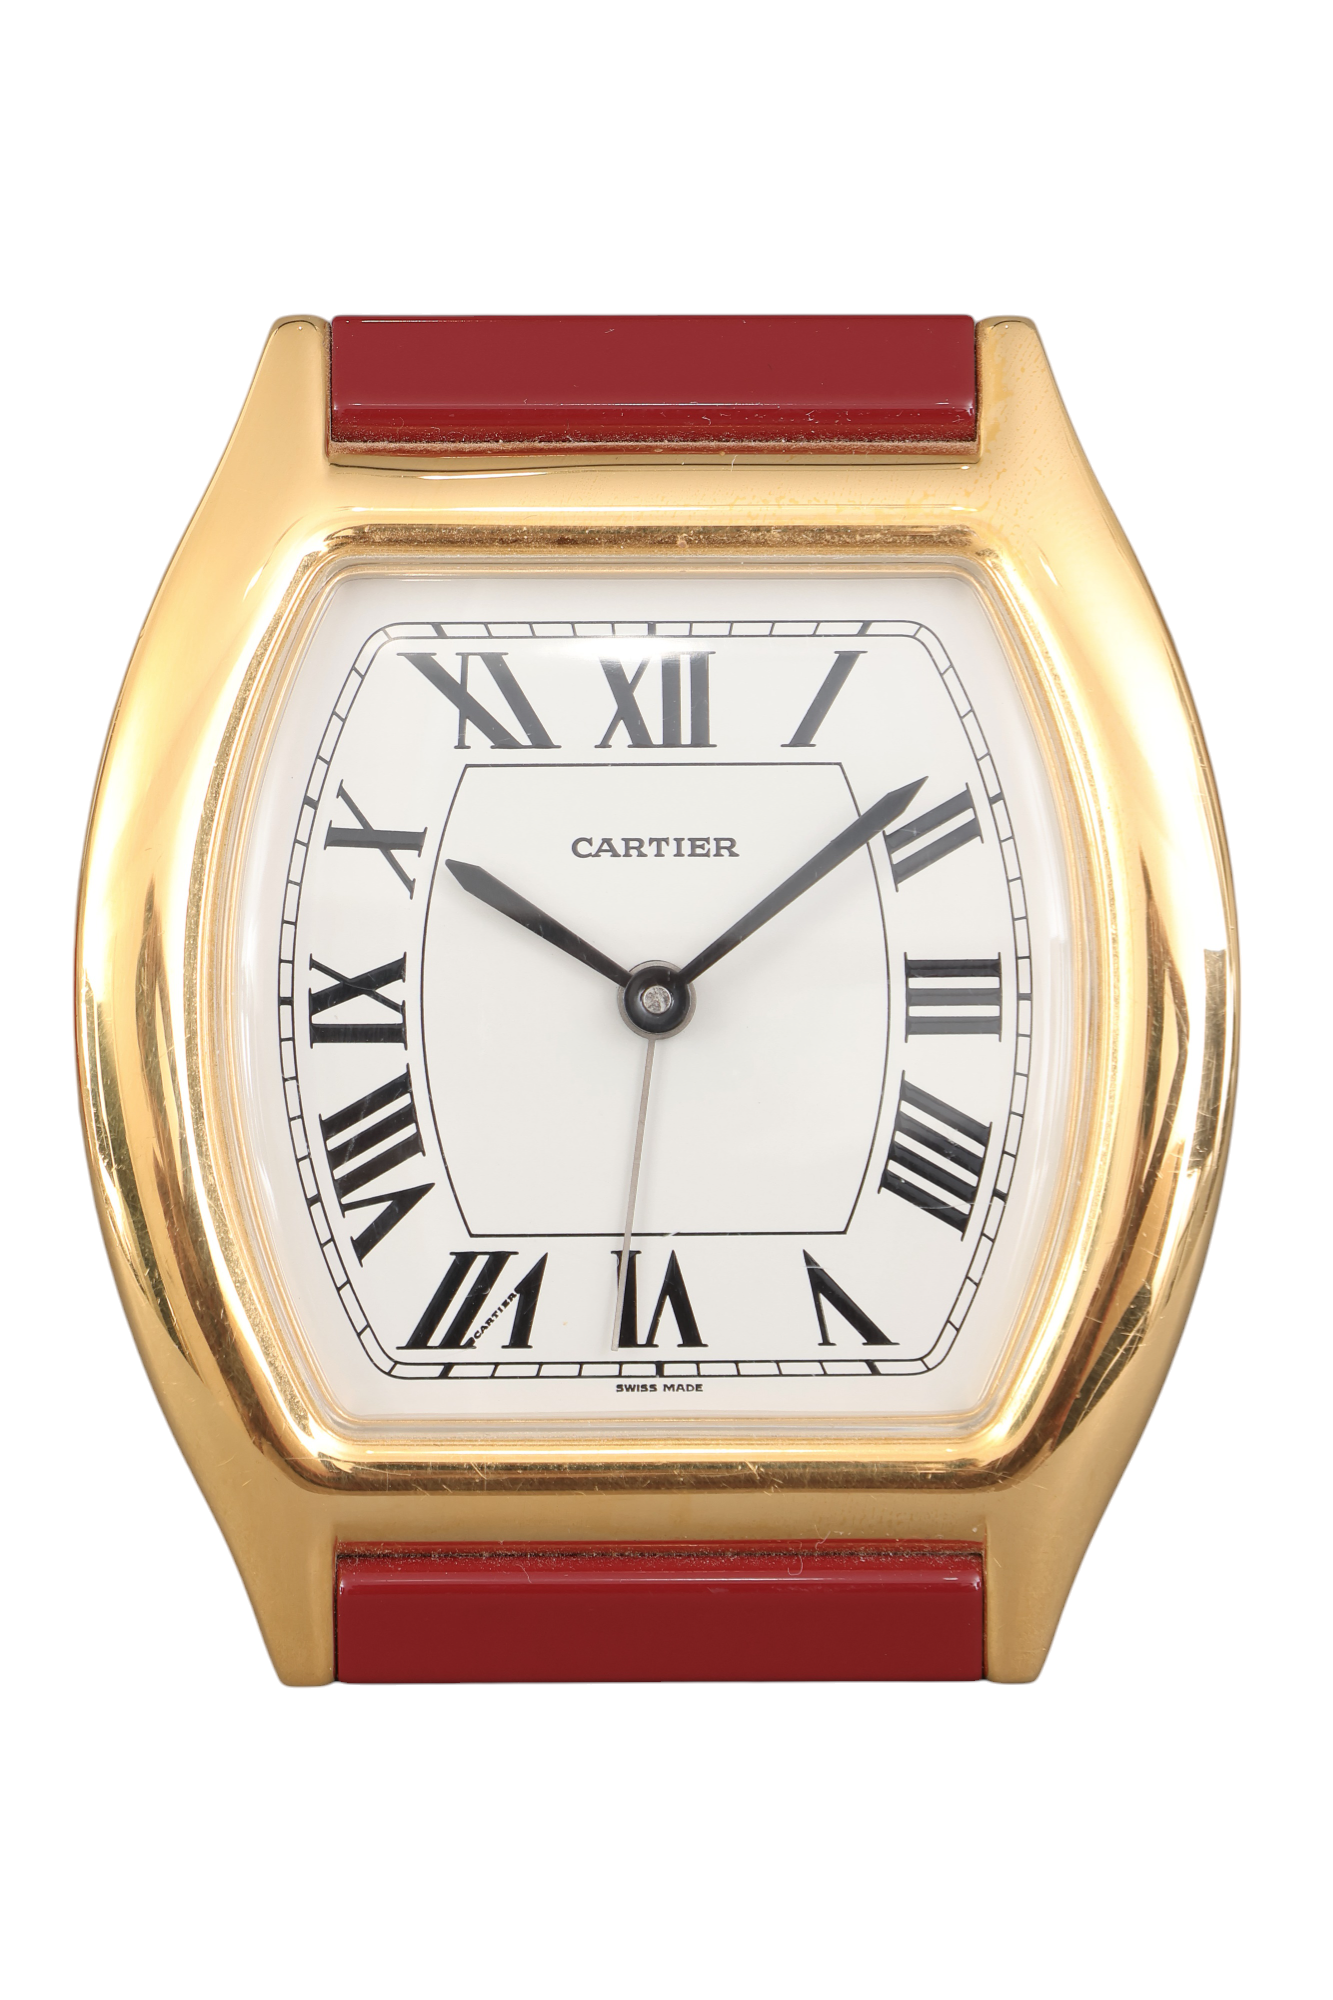 Cartier Tortue Must 'Tortue' model Table Clock with Cartier Certificate & box Discontinued